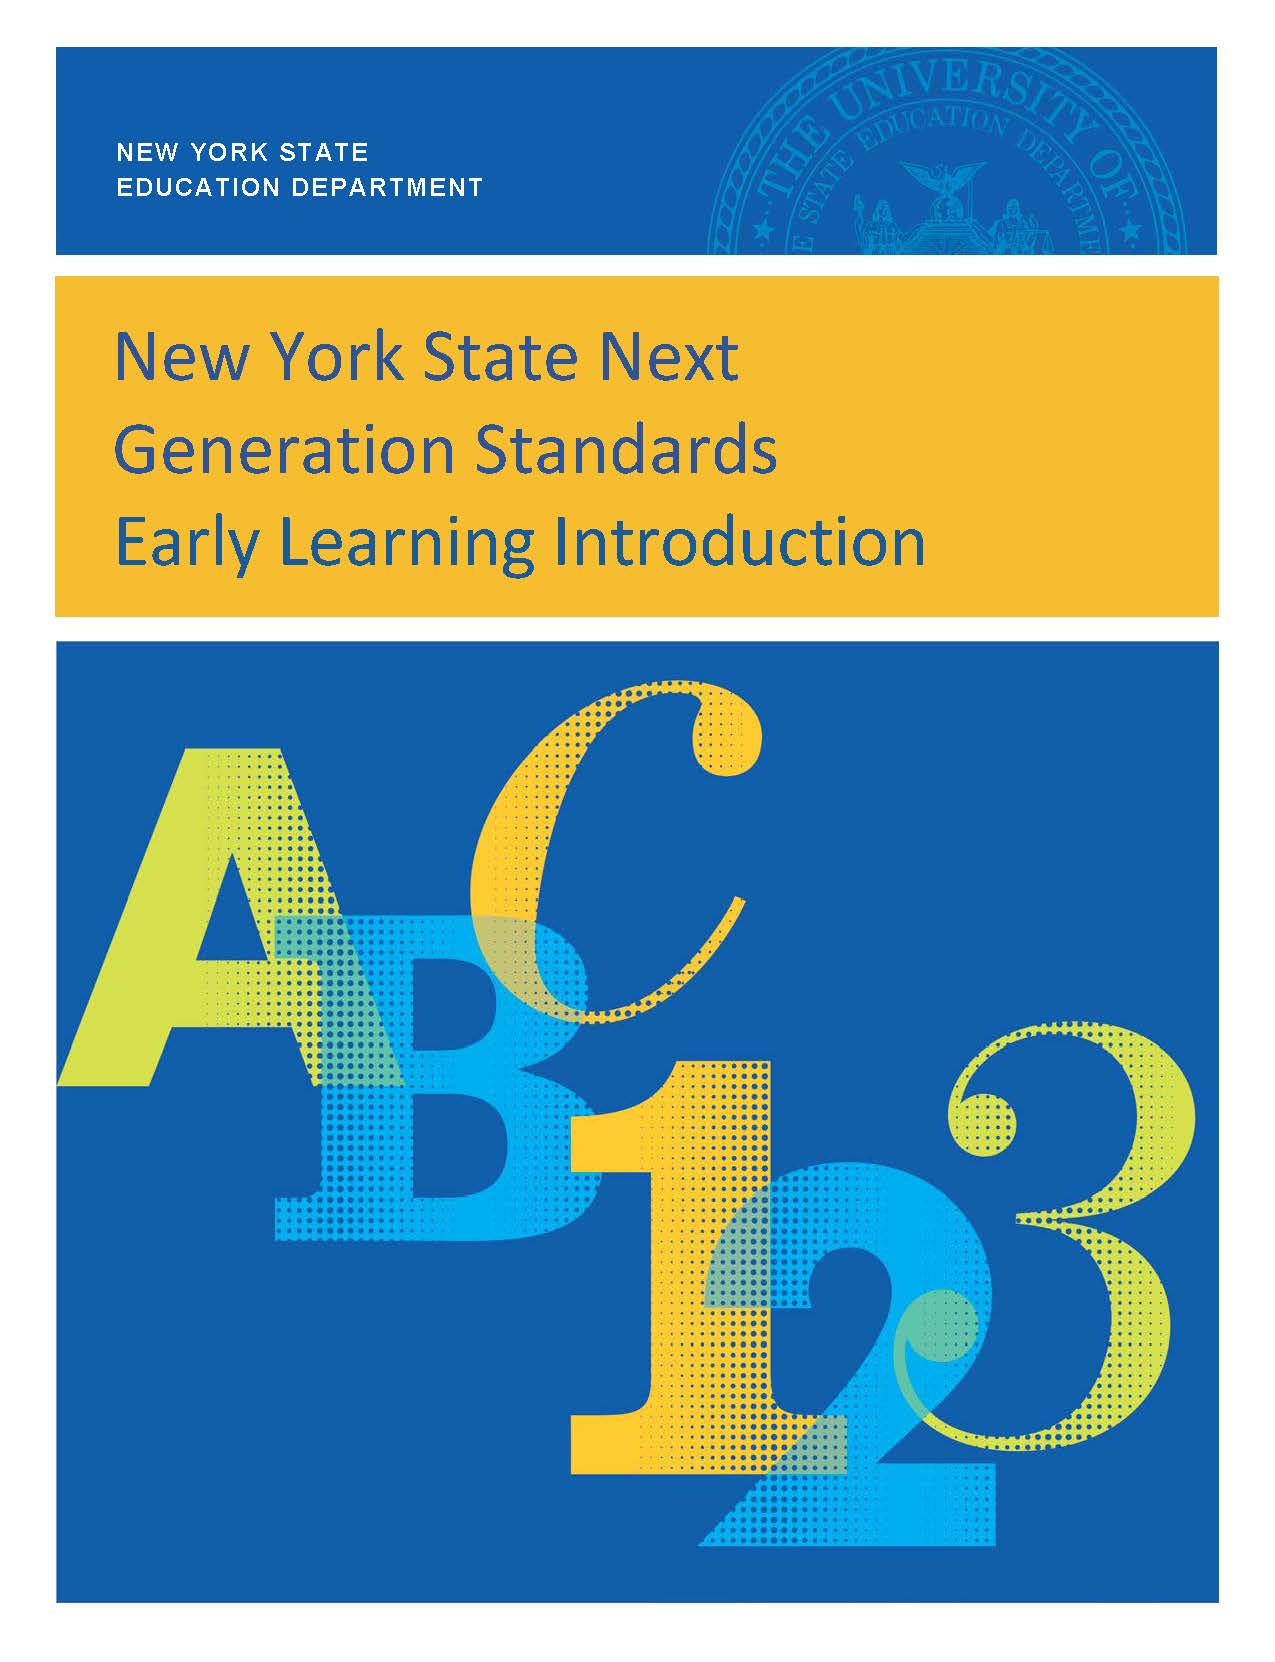 Cover image of the Introduction to the NYS Early Learning Standards